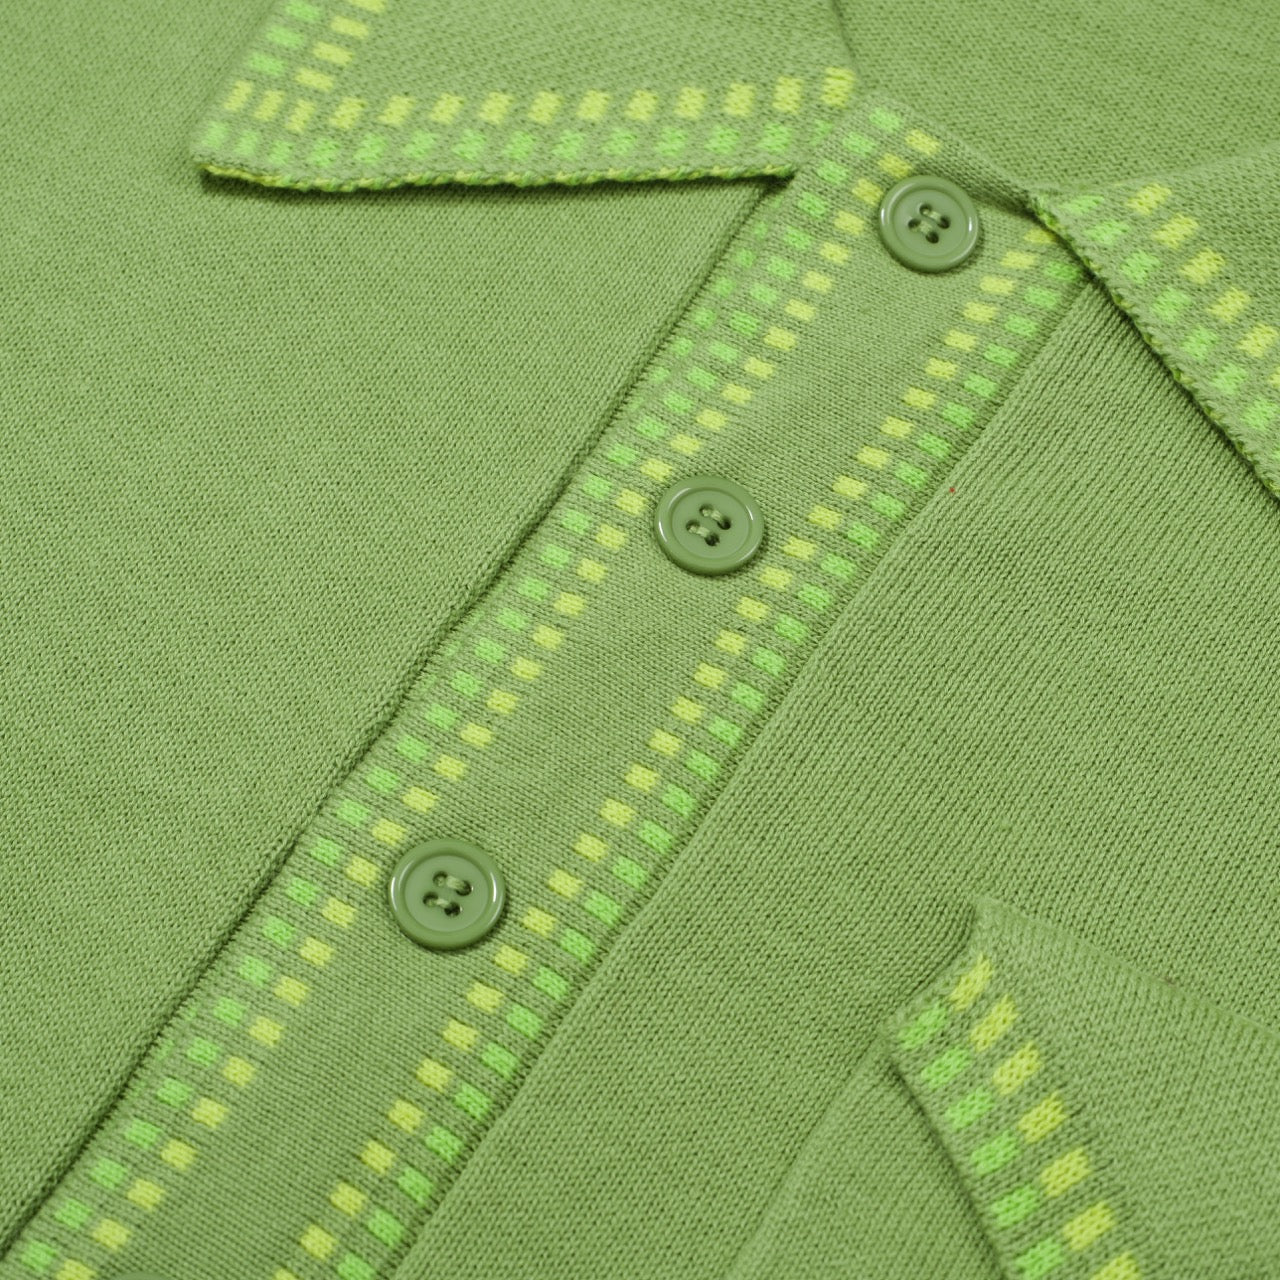 OXKNIT Men Vintage Clothing 1960s Mod Style Casual Light Green Knit Retro Polo